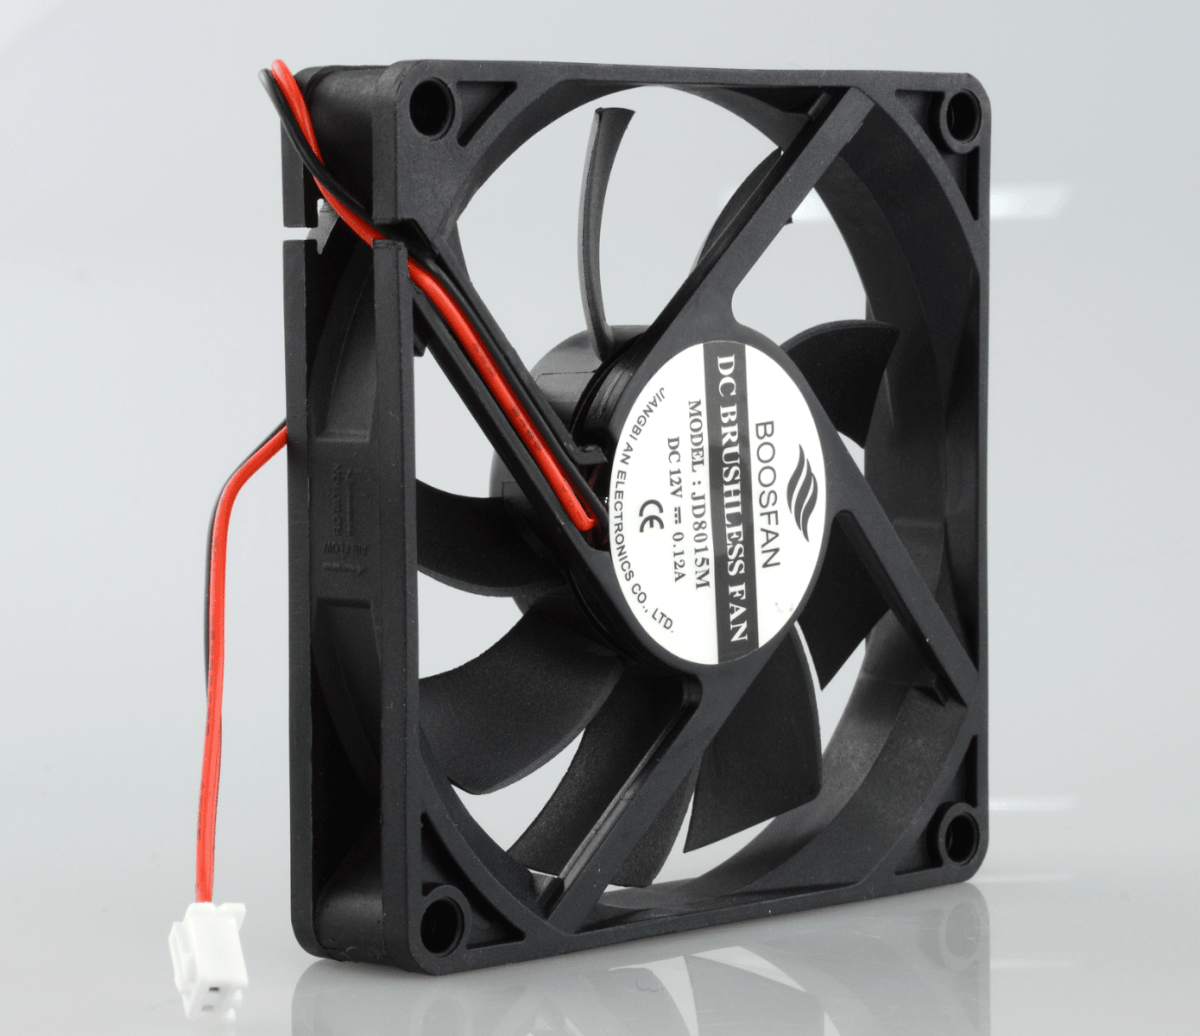 Anycubic Photon S UV-Lamp Cooling Fan